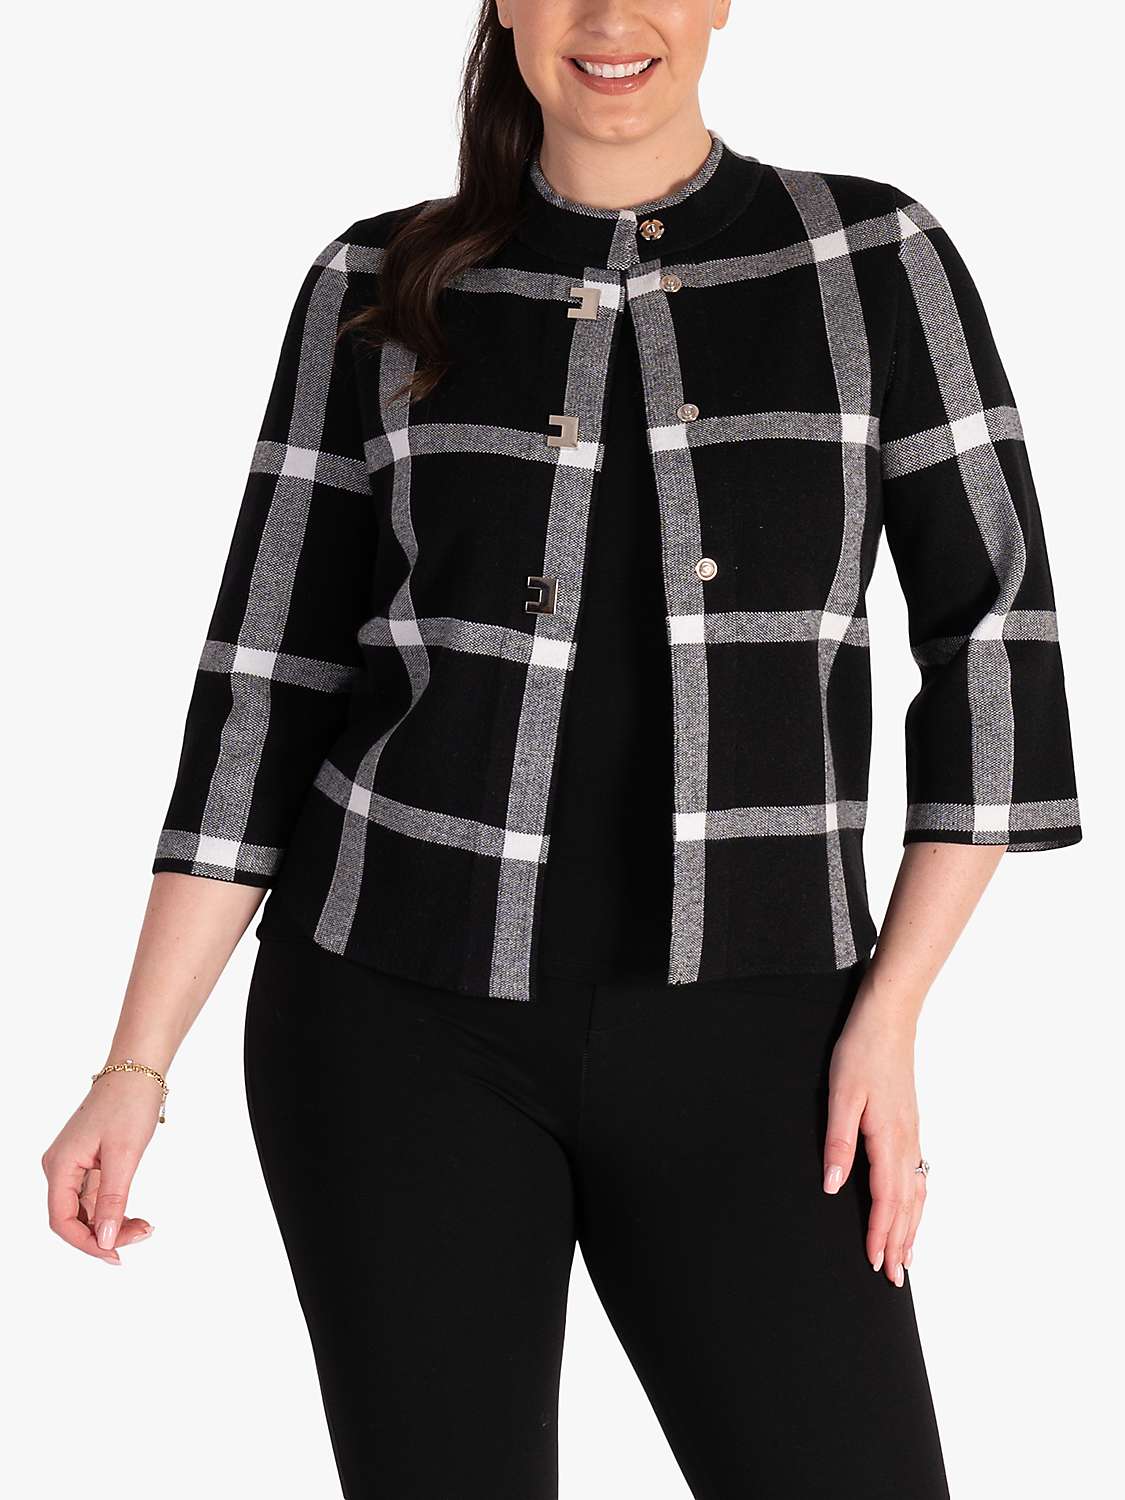 Buy chesca  3/4 Sleeve Check Jacket, Black/Ivory Online at johnlewis.com